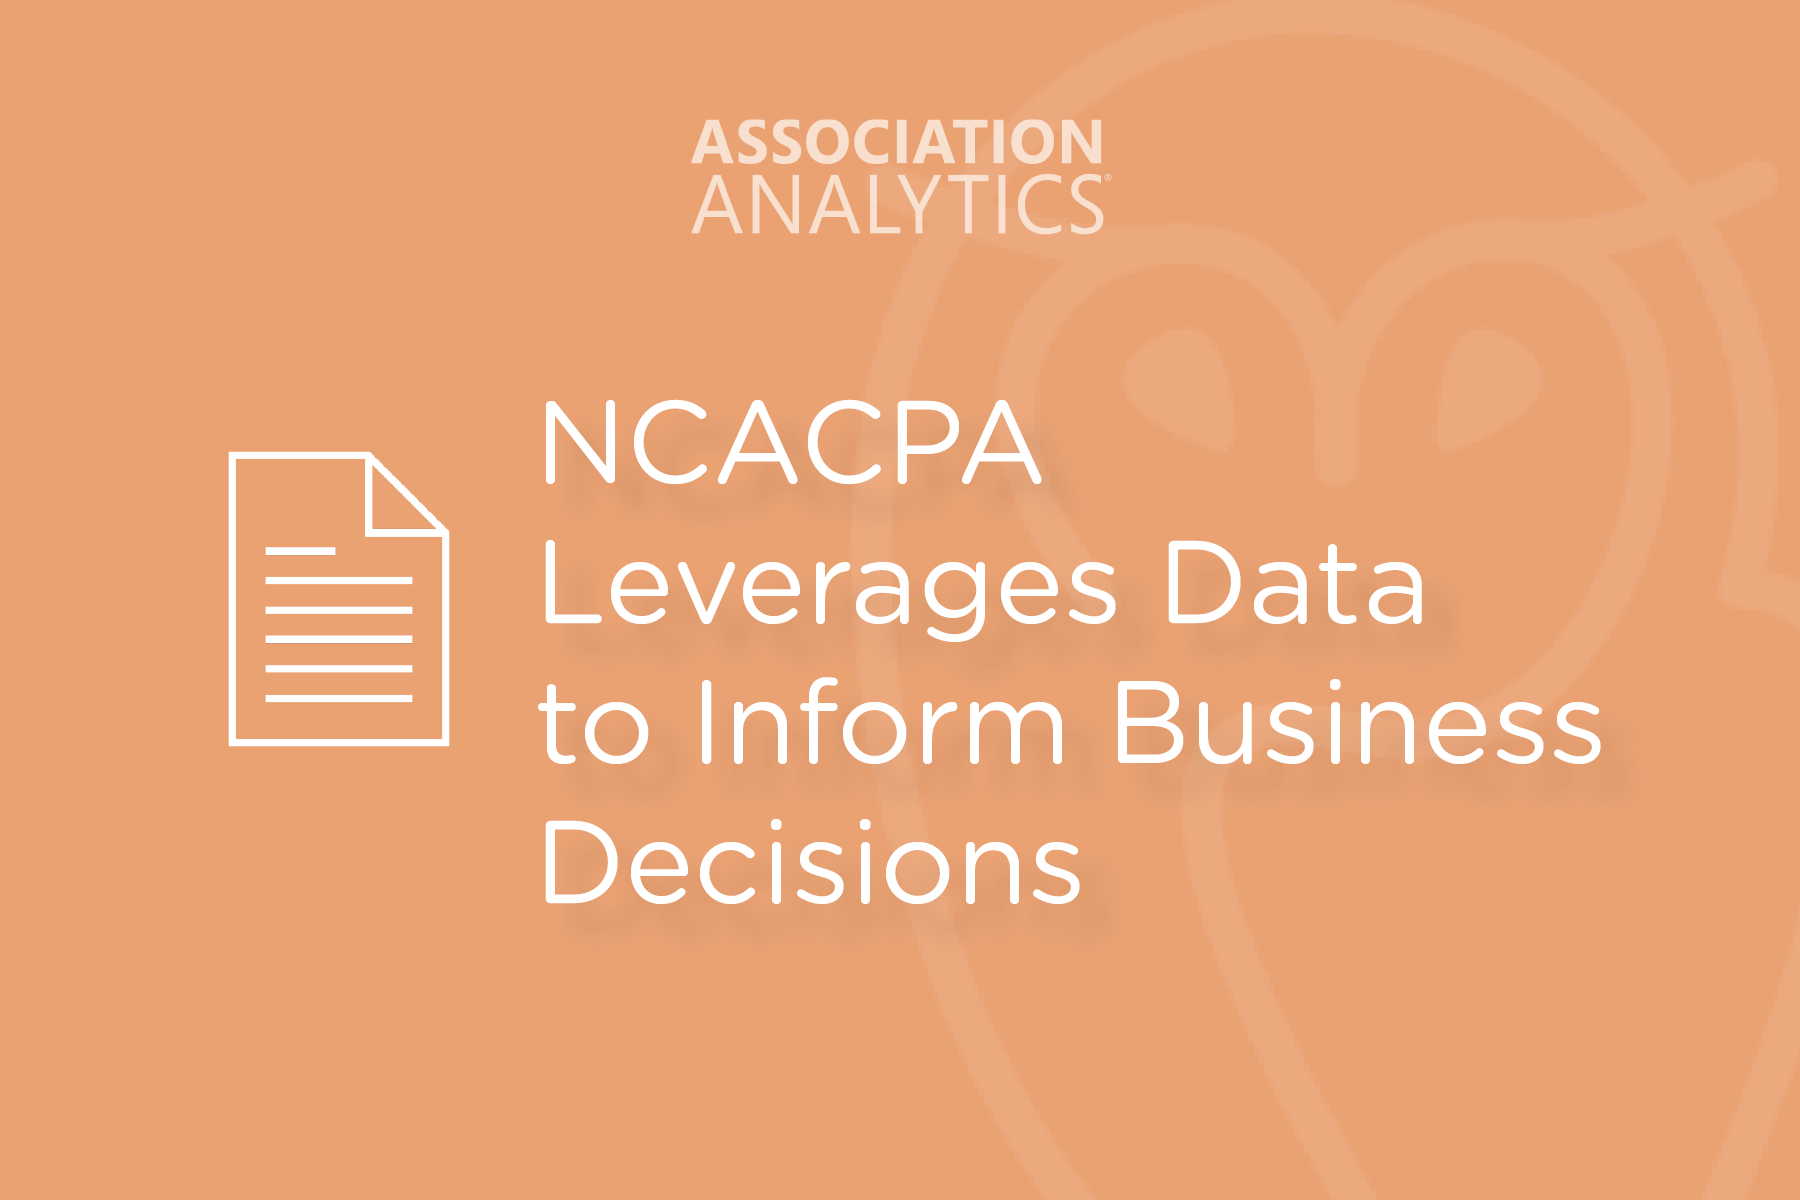 NCACPA Leverages Data to Inform Business Decisions